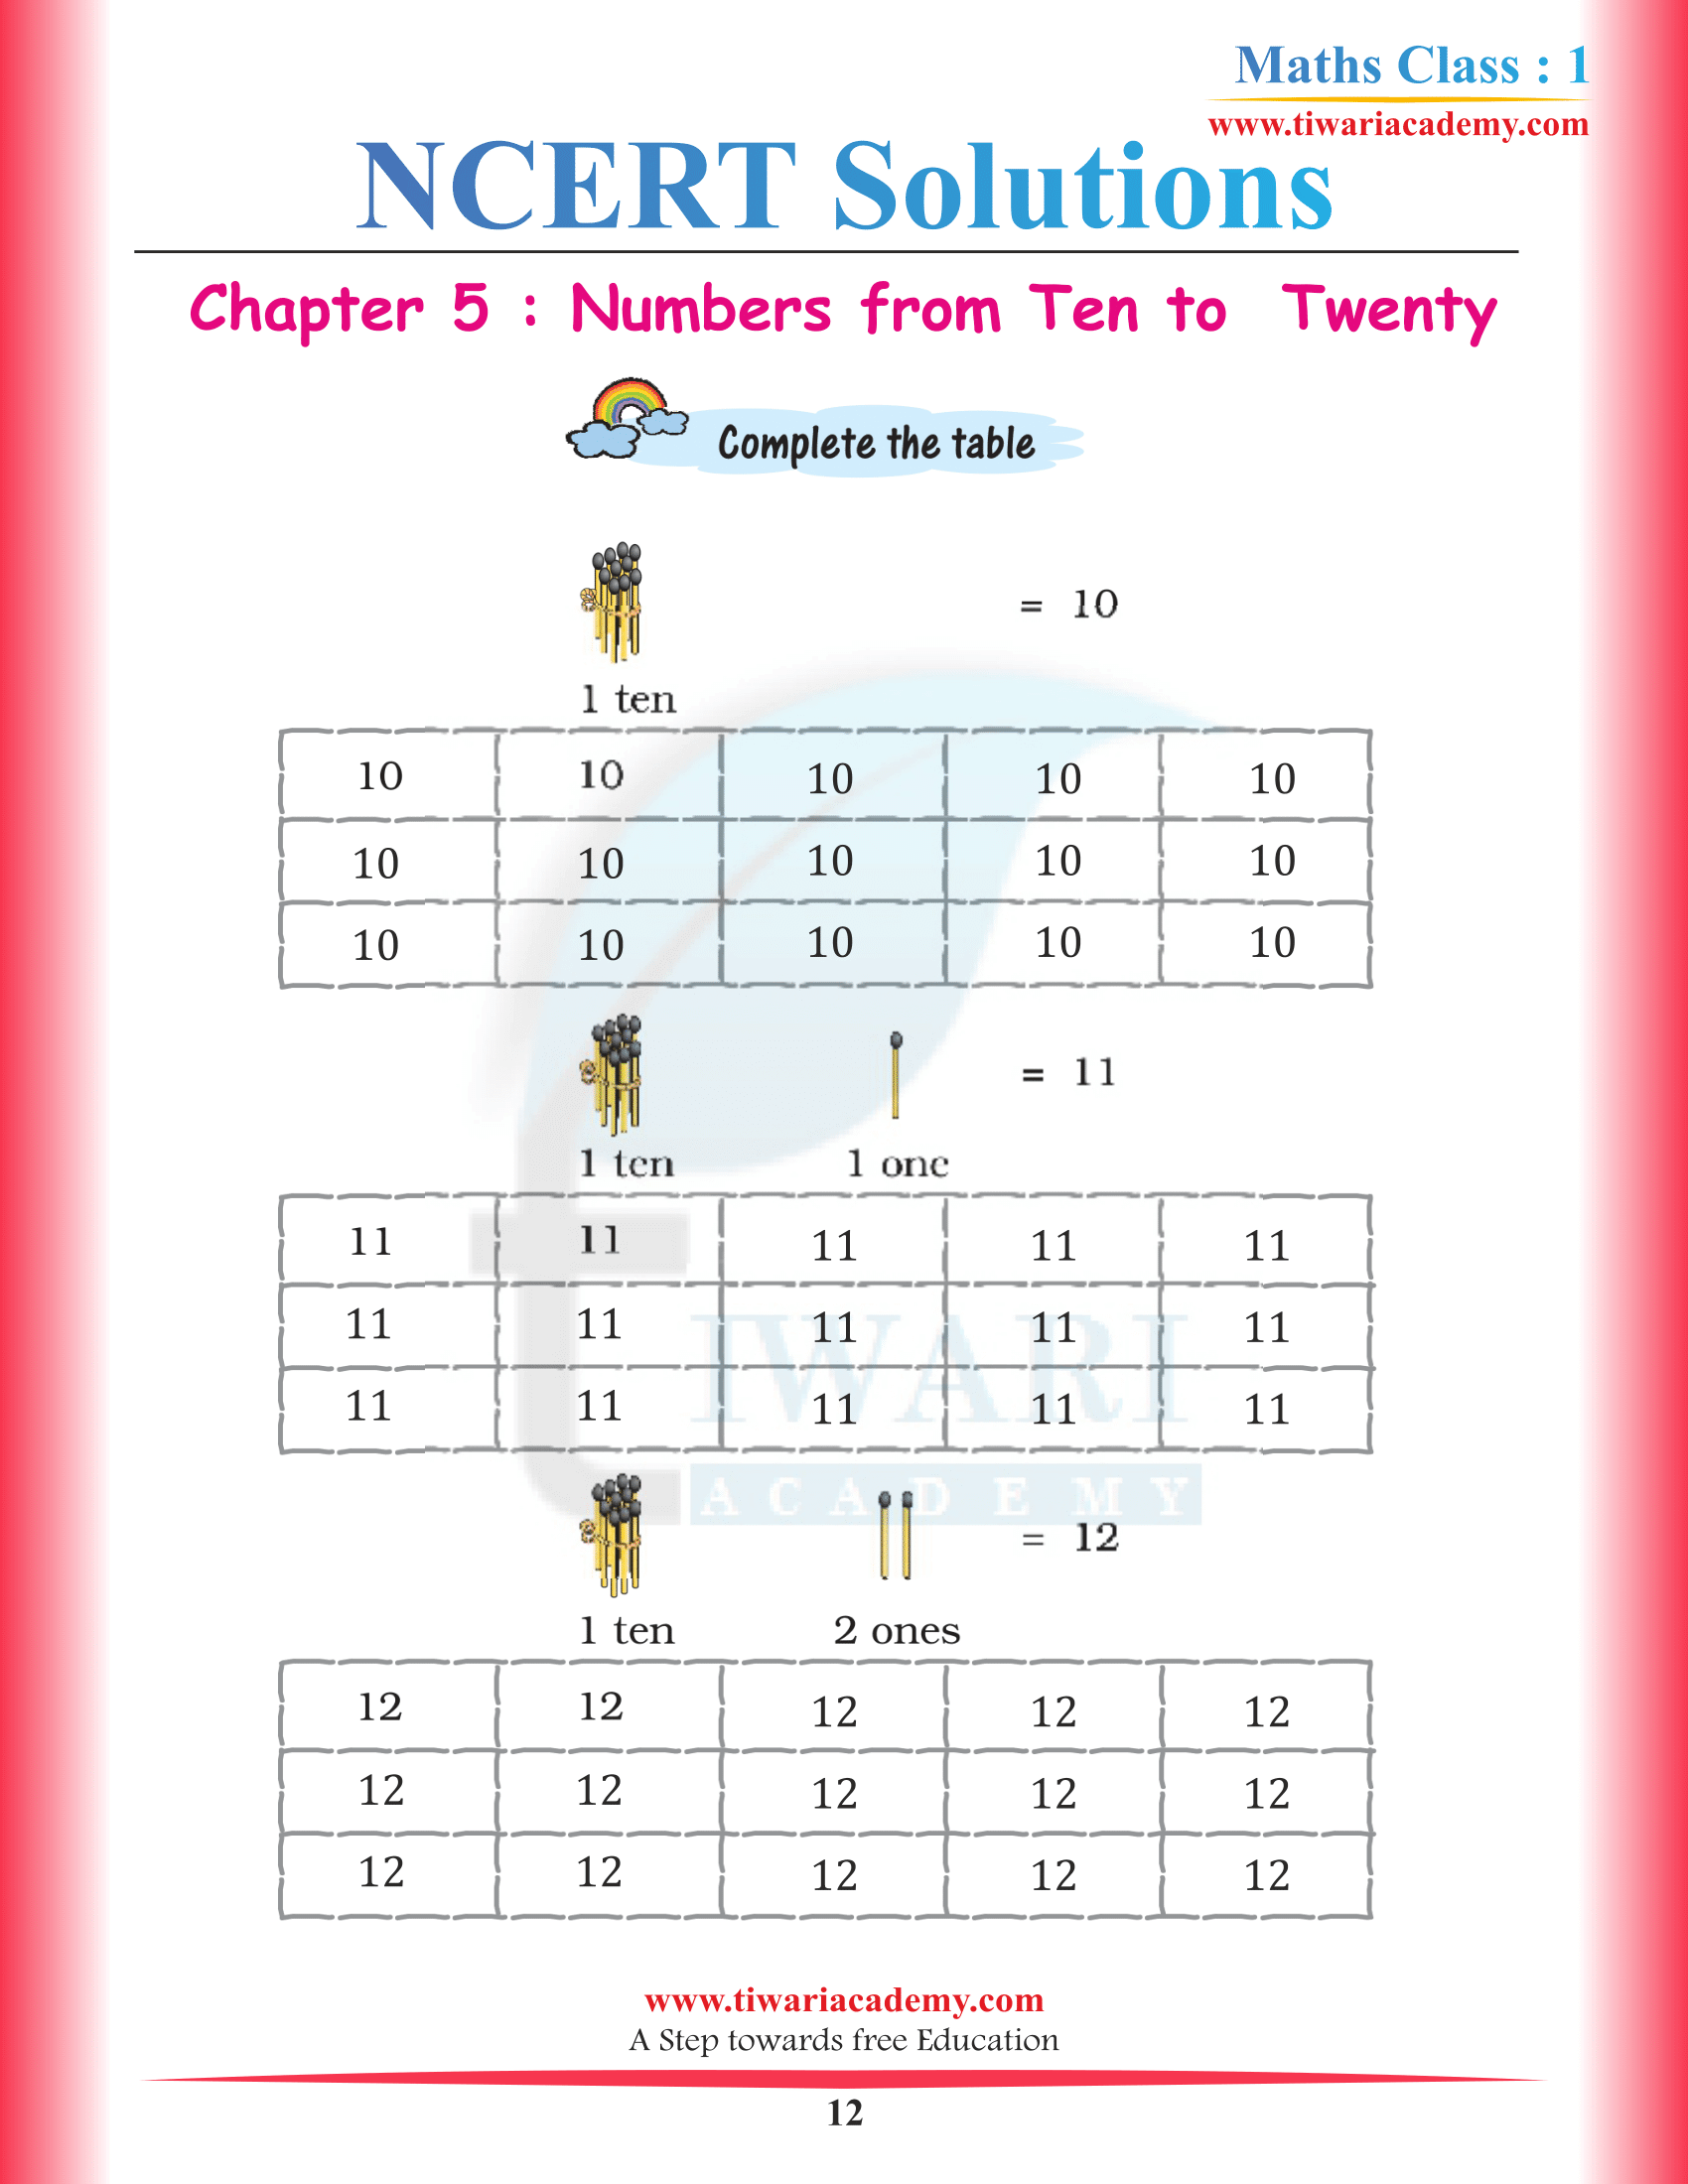 NCERT Solutions for Class 1 Maths Chapter 5 all answers